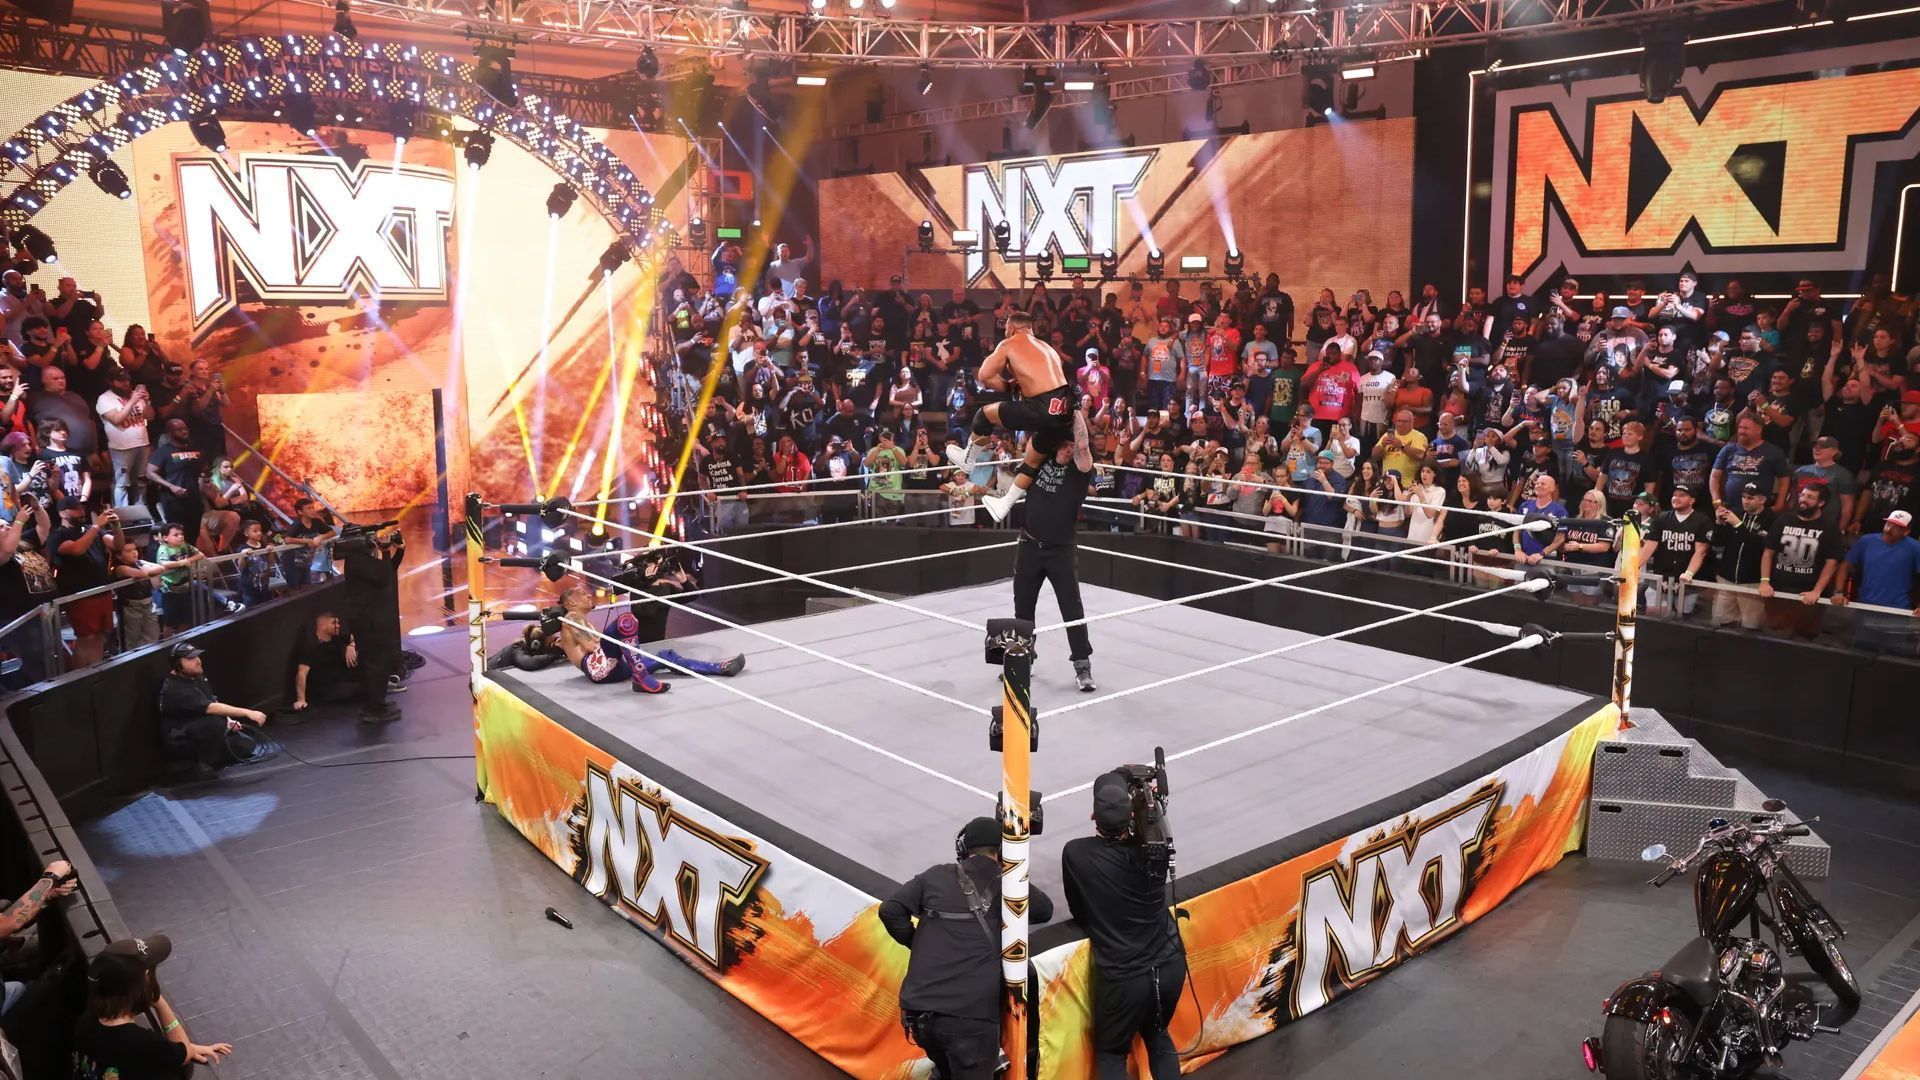 The WWE NXT ring and logos/set at the Performance Center